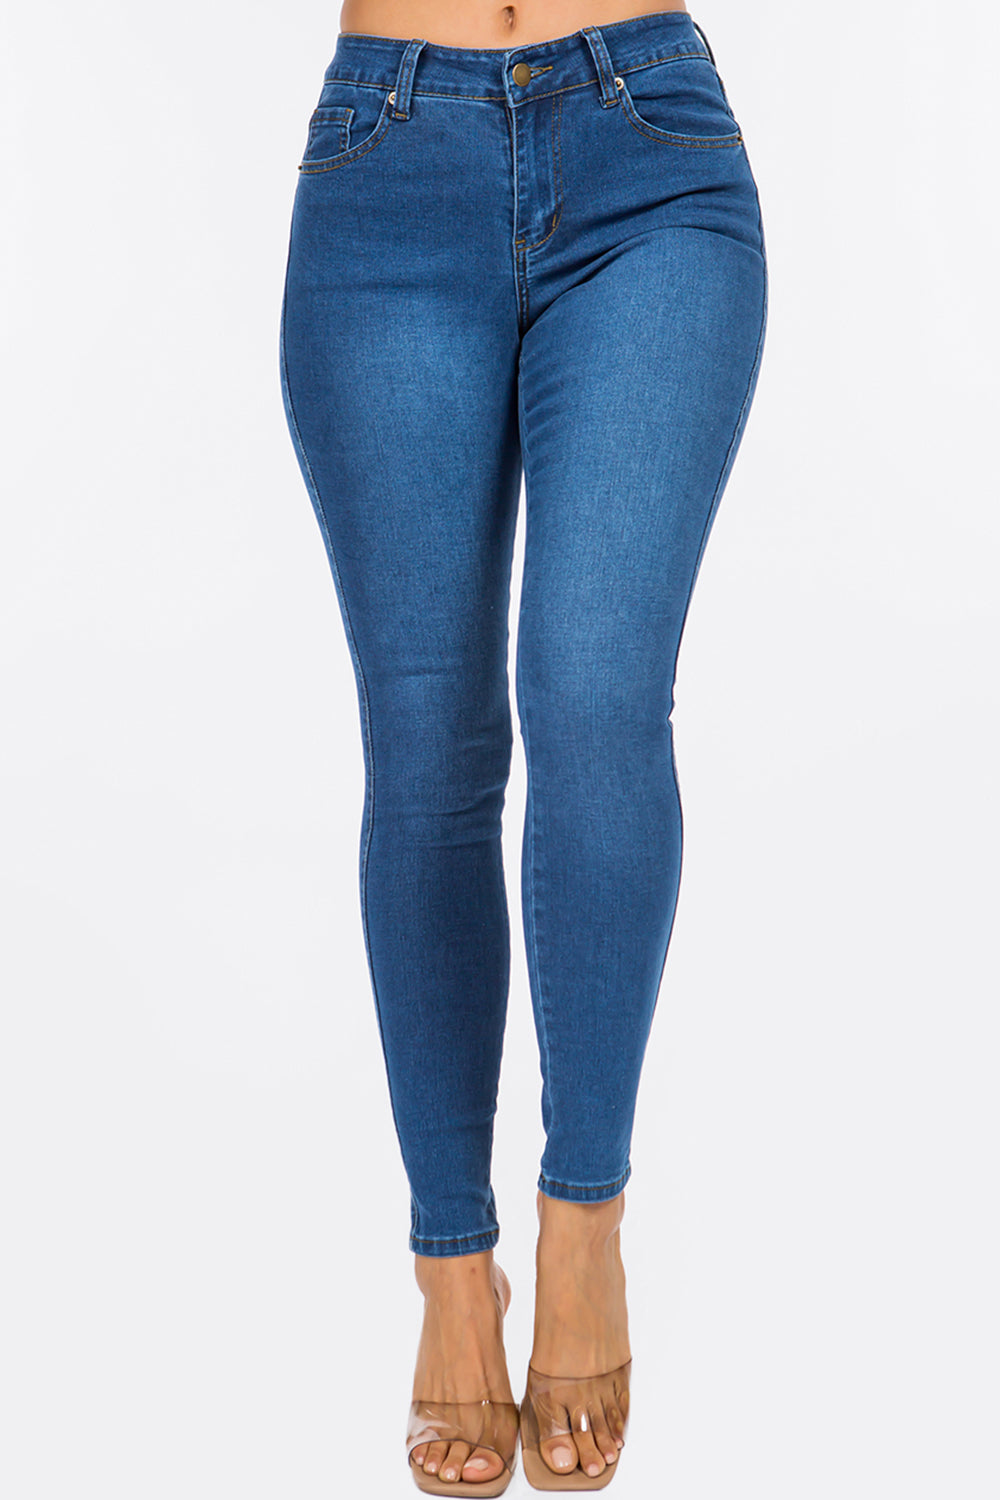 TURTLE Wholesale Blue @ Rise Mid BLUE – WR3702 Turtle Jeans Jeans Classic Skinny